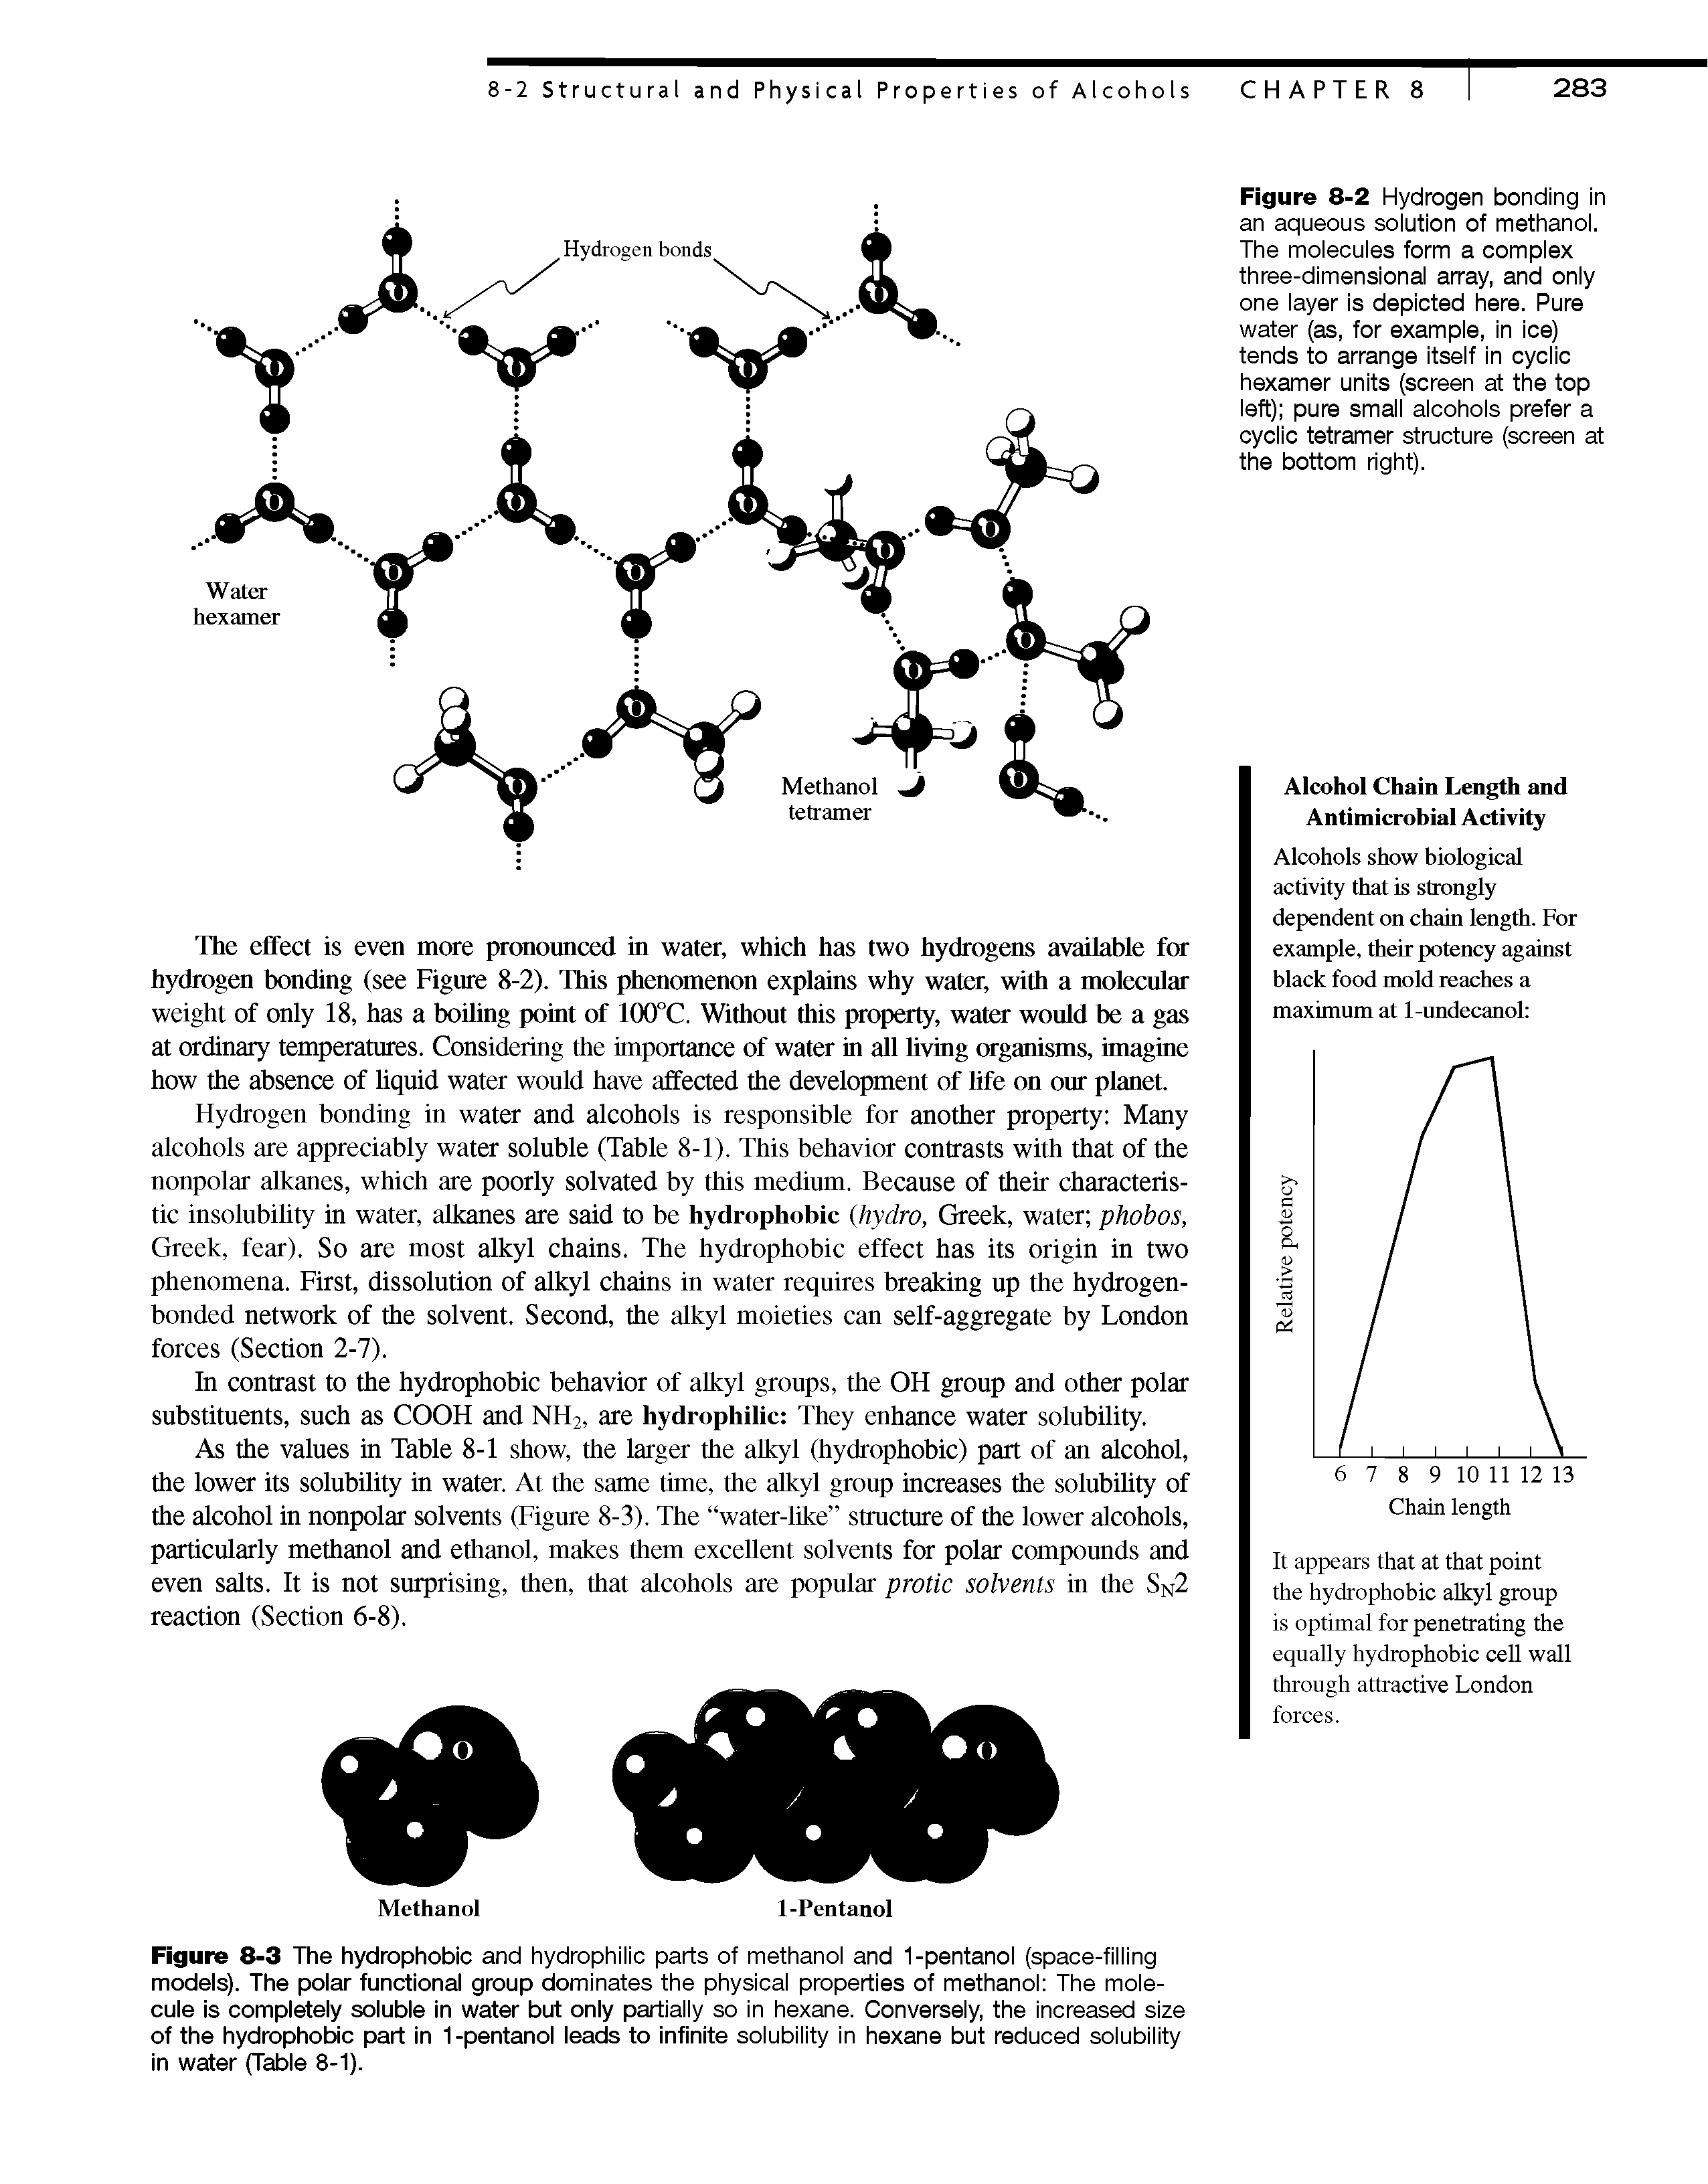 Figure 8-2 Hydrogen bonding in an aqueous solution of methanol. The molecules form a complex three-dimensional array, and only one layer is depicted here. Pure water (as, for example, in ice) tends to arrange itself in cyclic hexamer units (screen at the top left) pure small alcohols prefer a cyclic tetramer structure (screen at the bottom right).